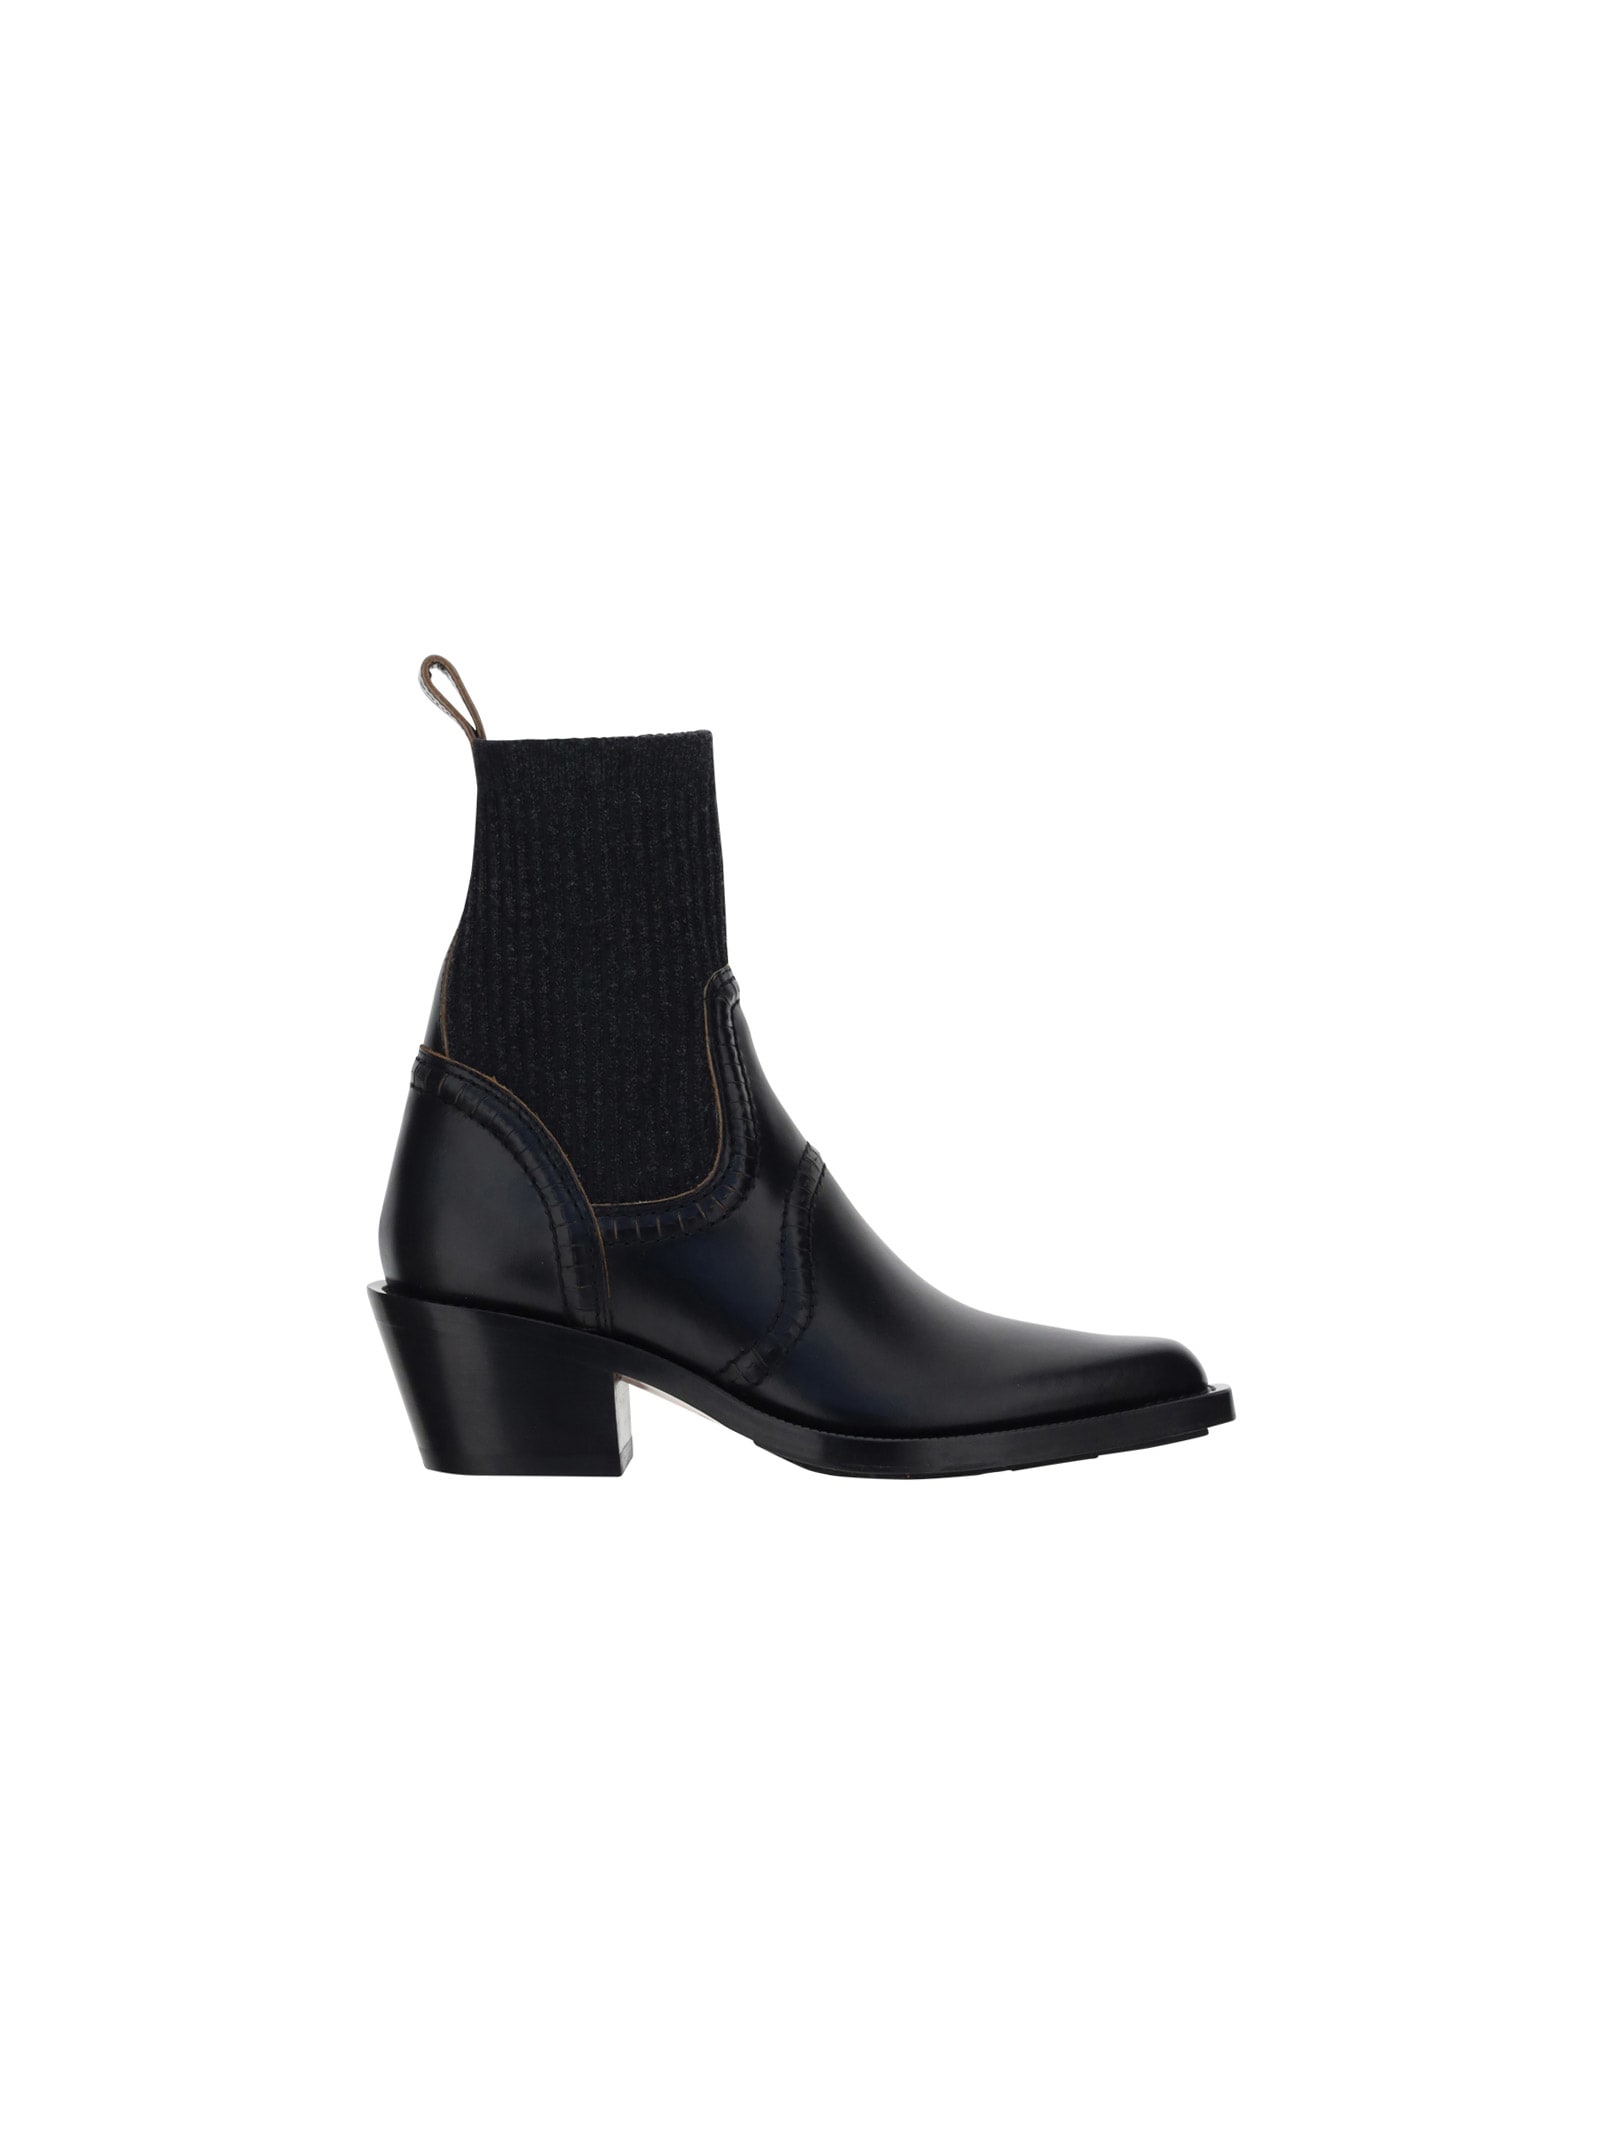 Chloé Nellie Ankle Boots